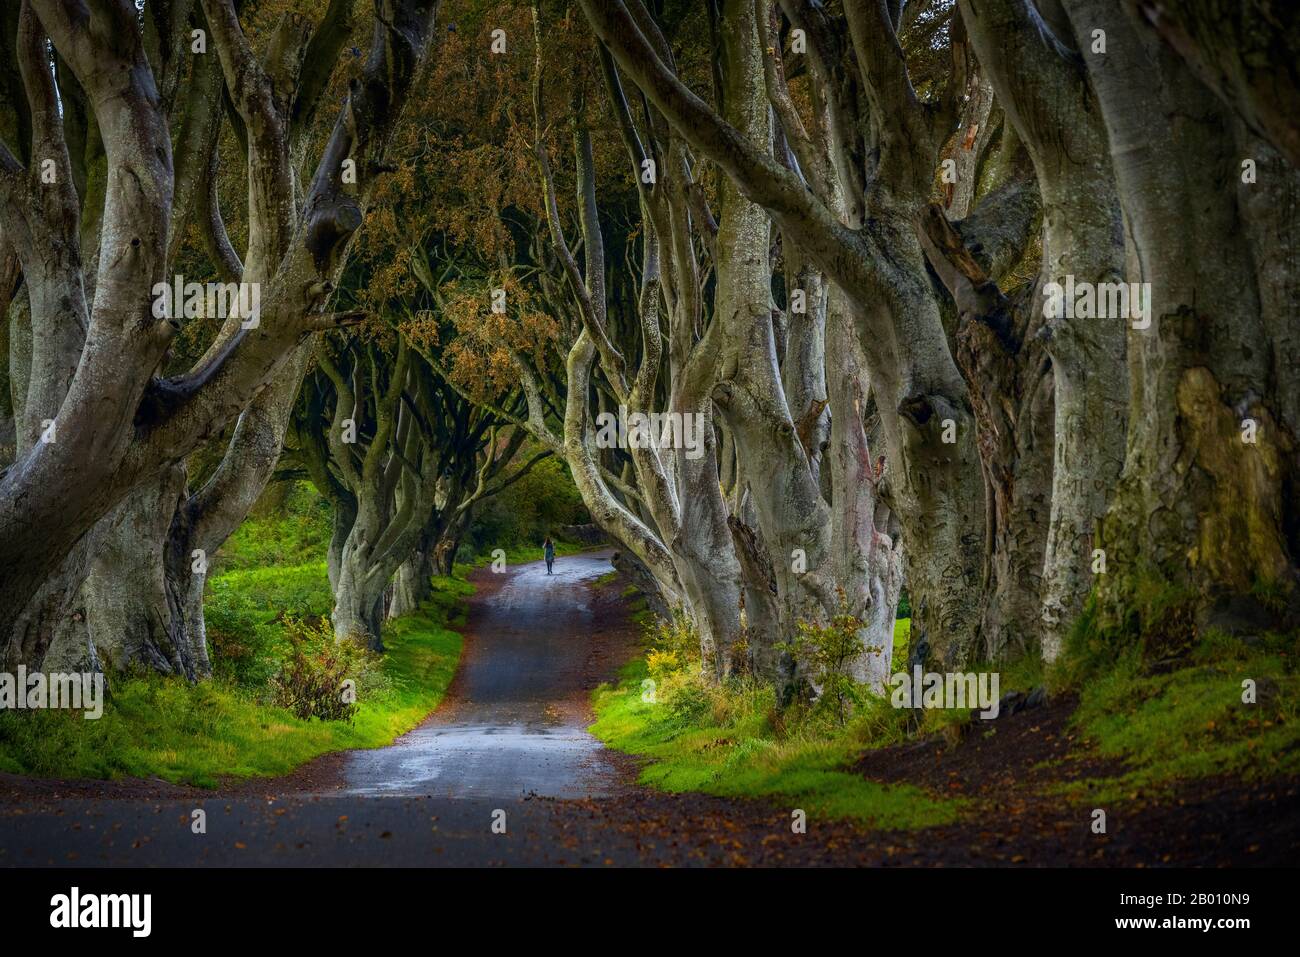 The twisted canopy of Beach trees made famous by The House of Thrones series, lining the road up to Gracehill House in Ireland, an unforgettable sight Stock Photo